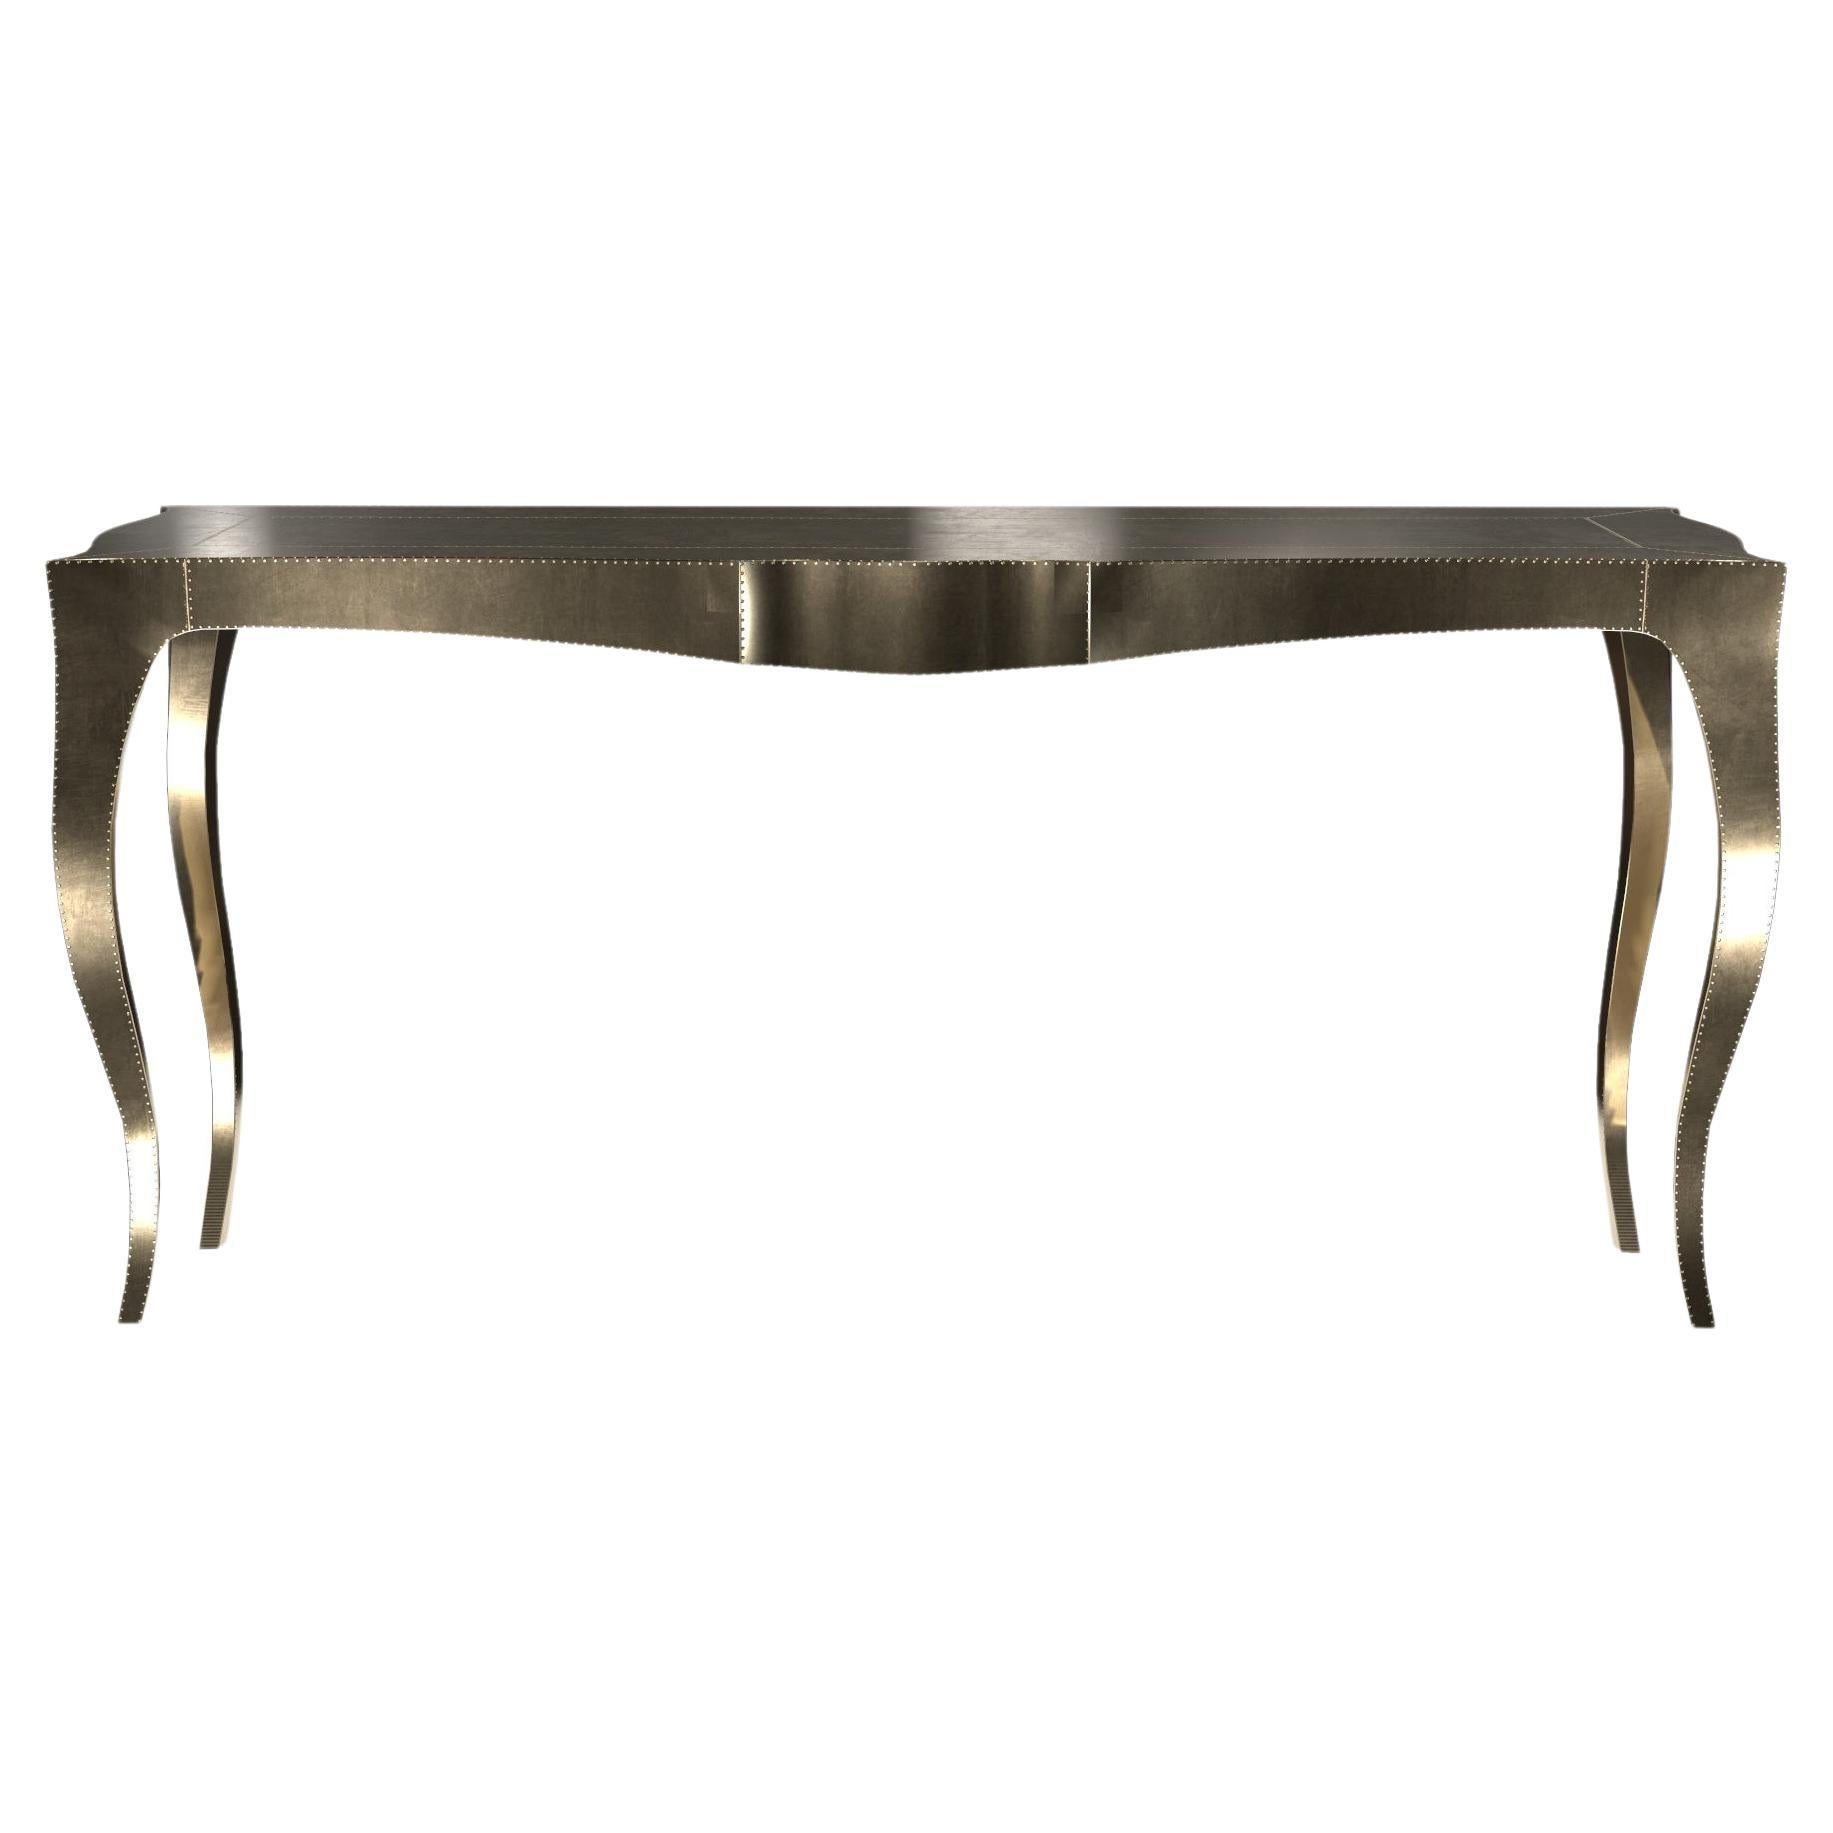 Louise Console Art Deco Industrial and Work Tables Smooth Brass by Paul Mathieu